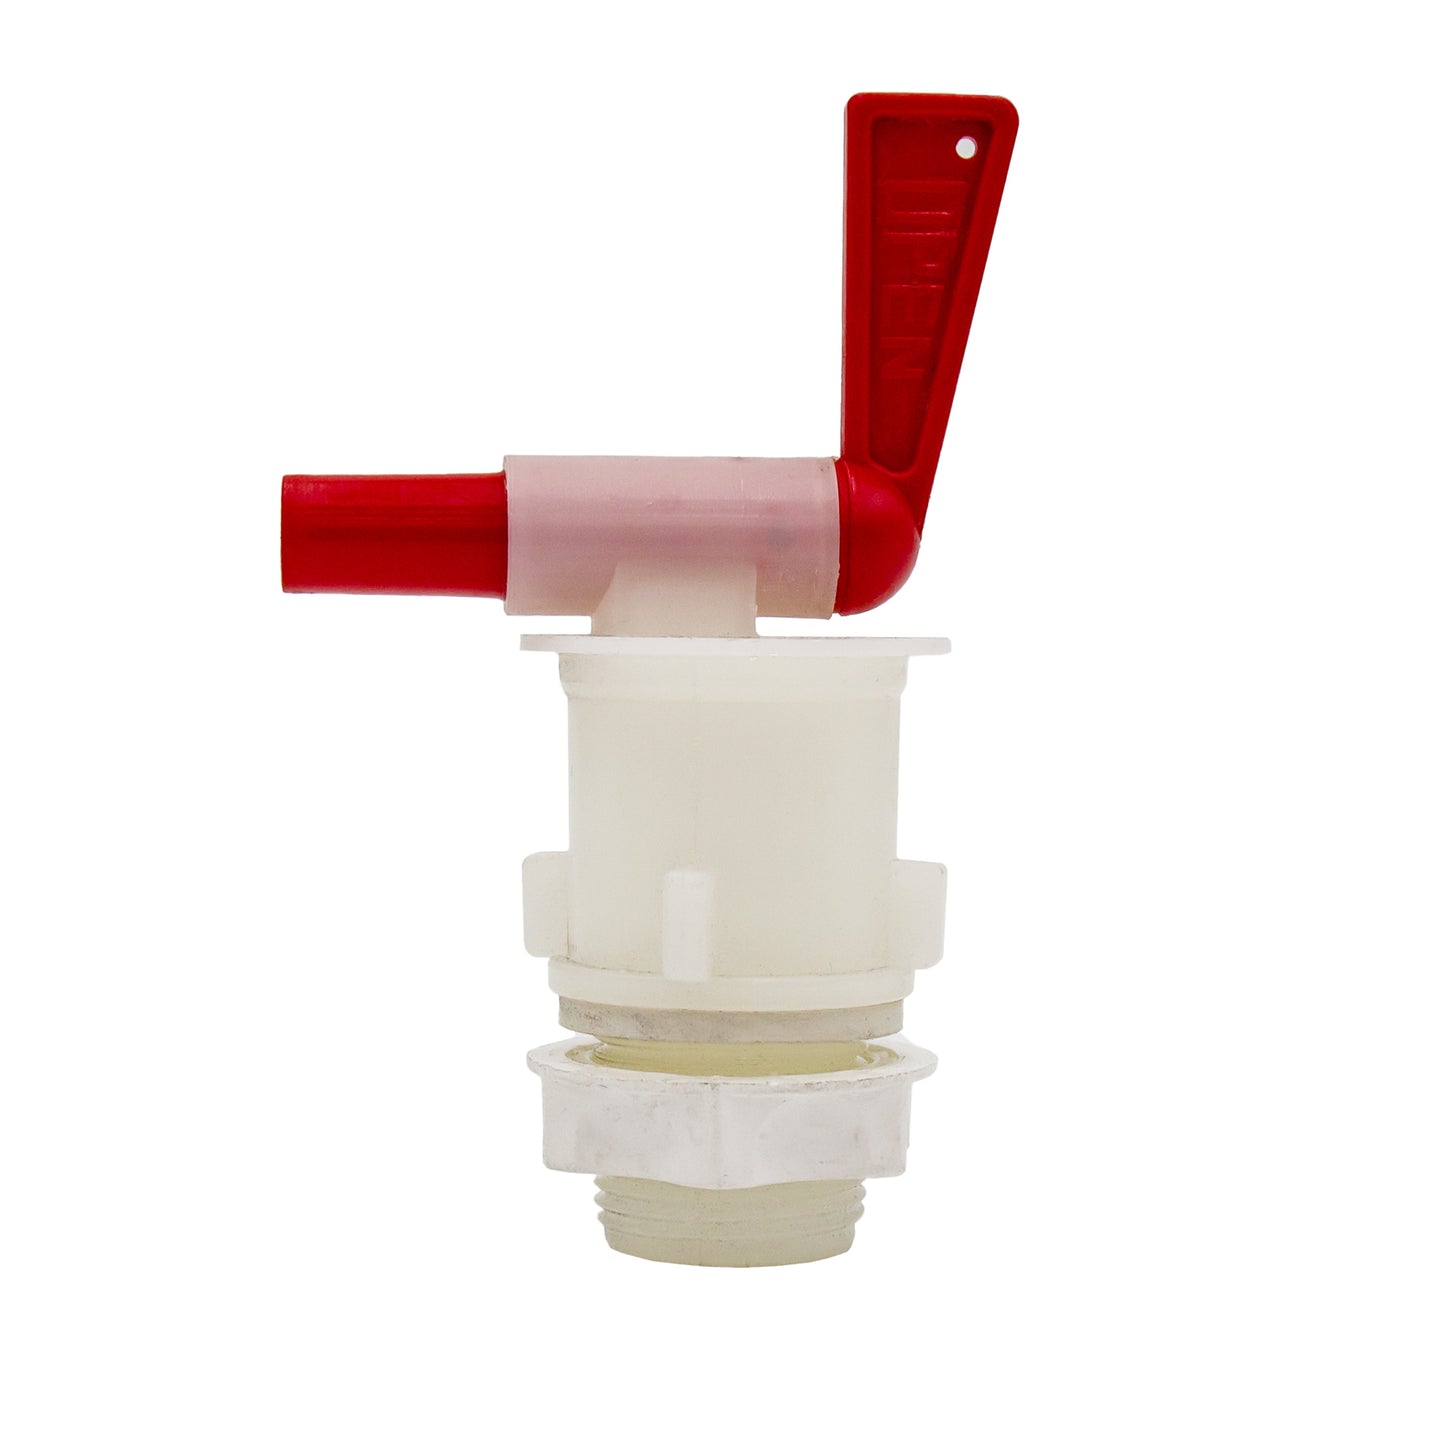 Plastic tap - 19mm and 8mm Outlet